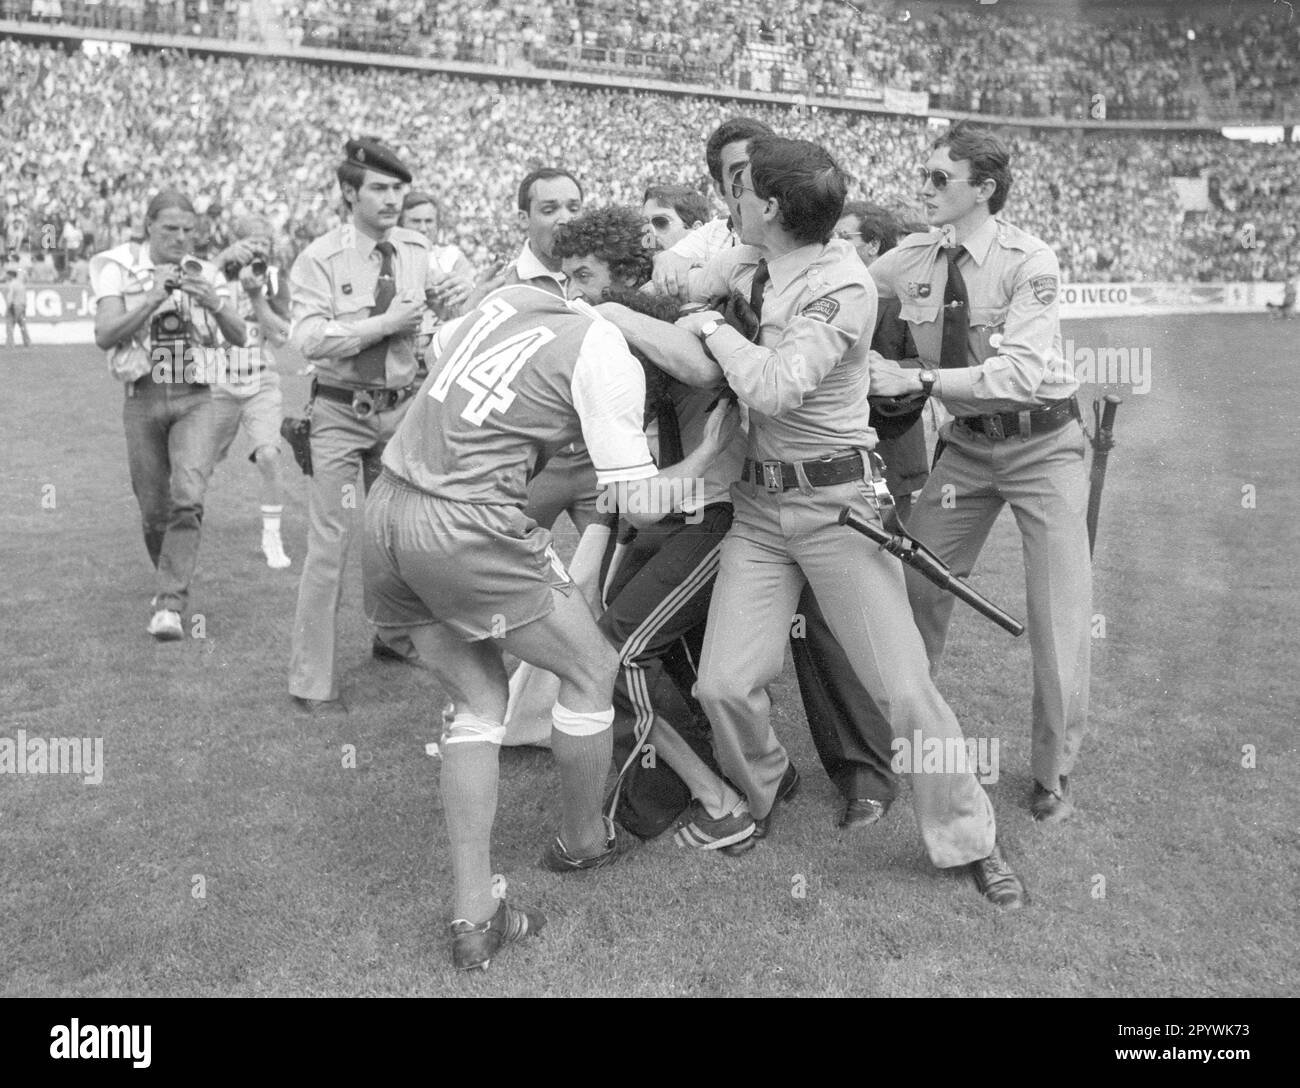 Football World Cup 1982 in Spain. Preliminary round: Algeria - Germany 2:1 / 16.06.1982 in Gijon. / Djamel Zidane (ALG/14) is harassed by a fan. The police try to separate them. [automated translation] Stock Photo